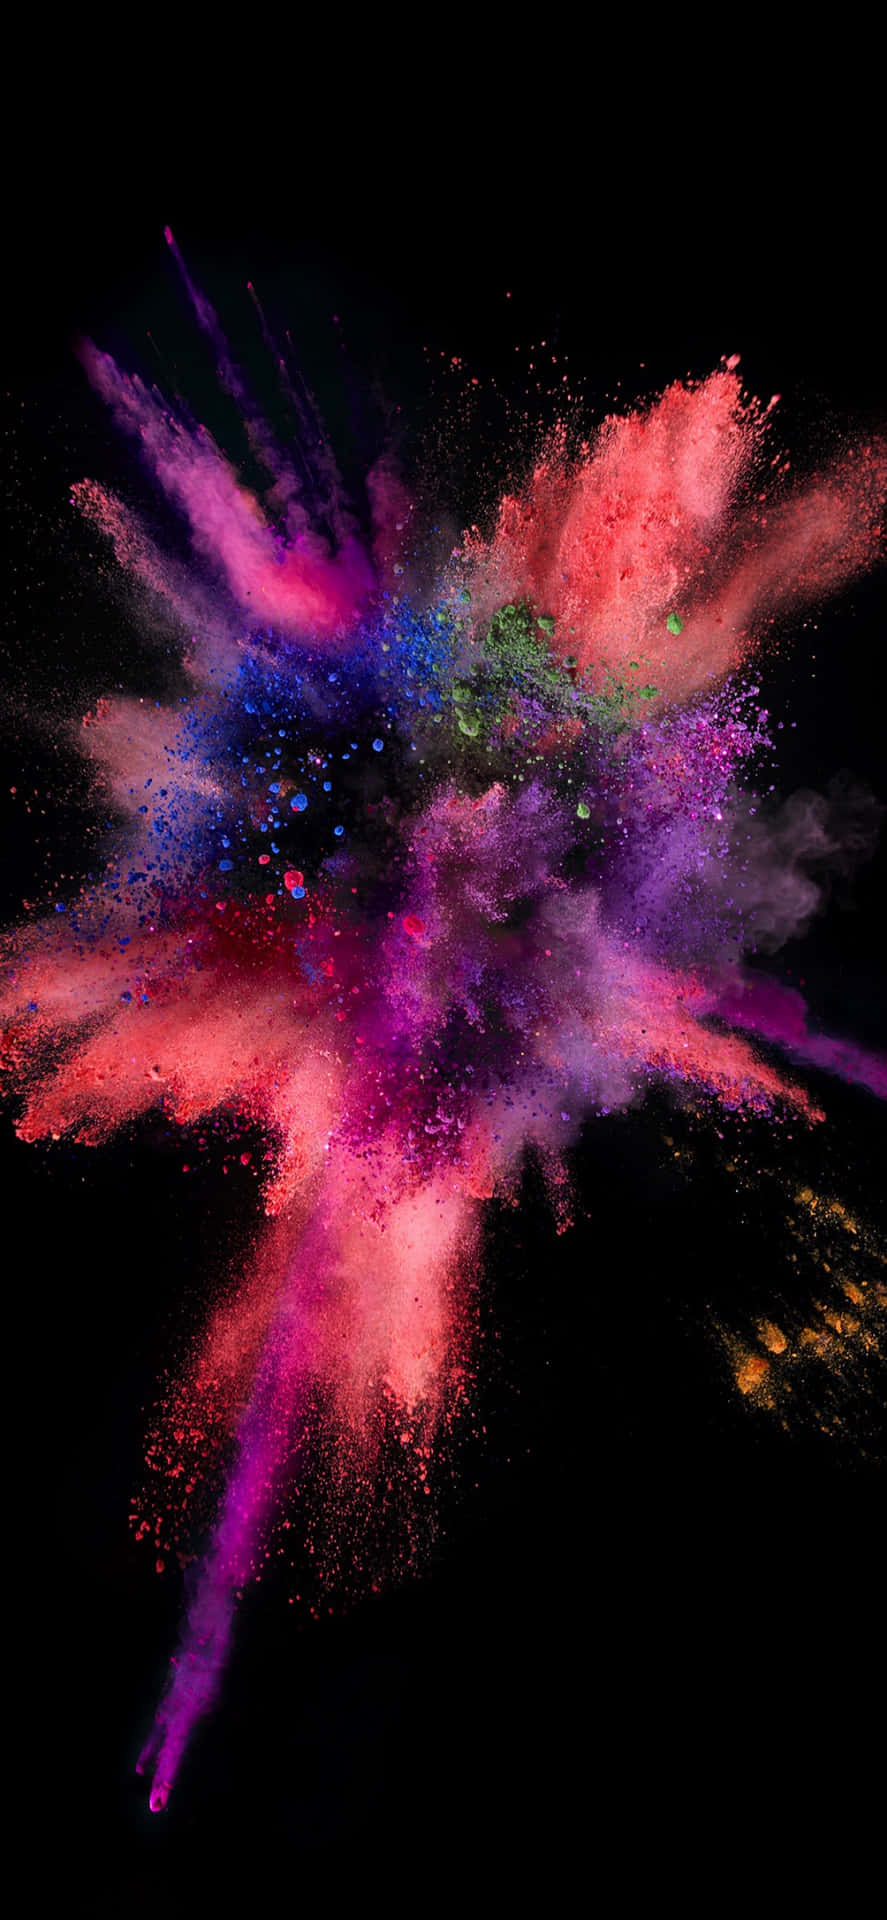 A Colorful Powder Explosion